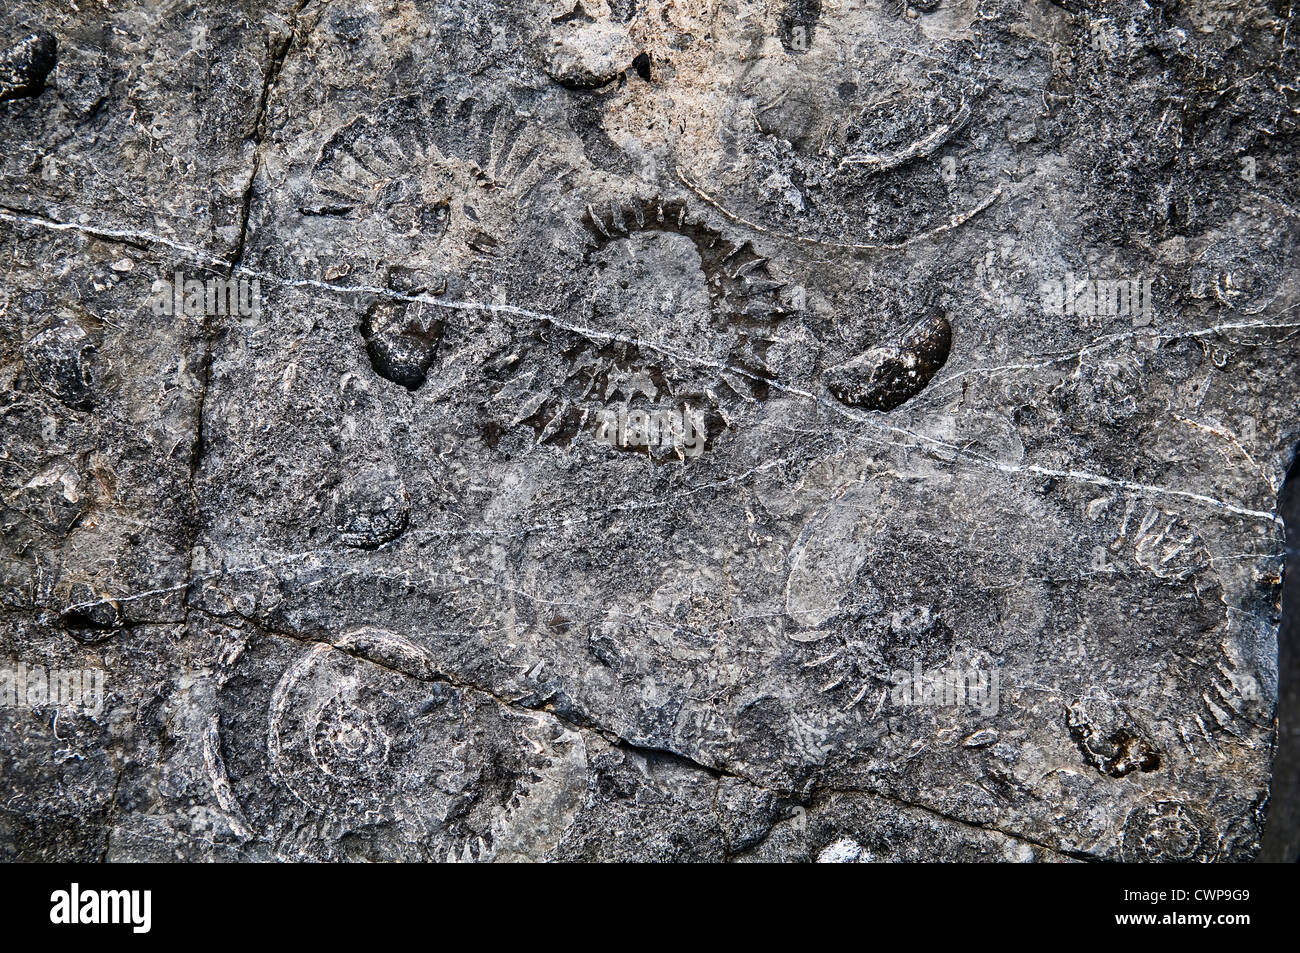 Traces of ammonite fossils in stones on the beach at Lyme Regis, Dorset, UK Stock Photo